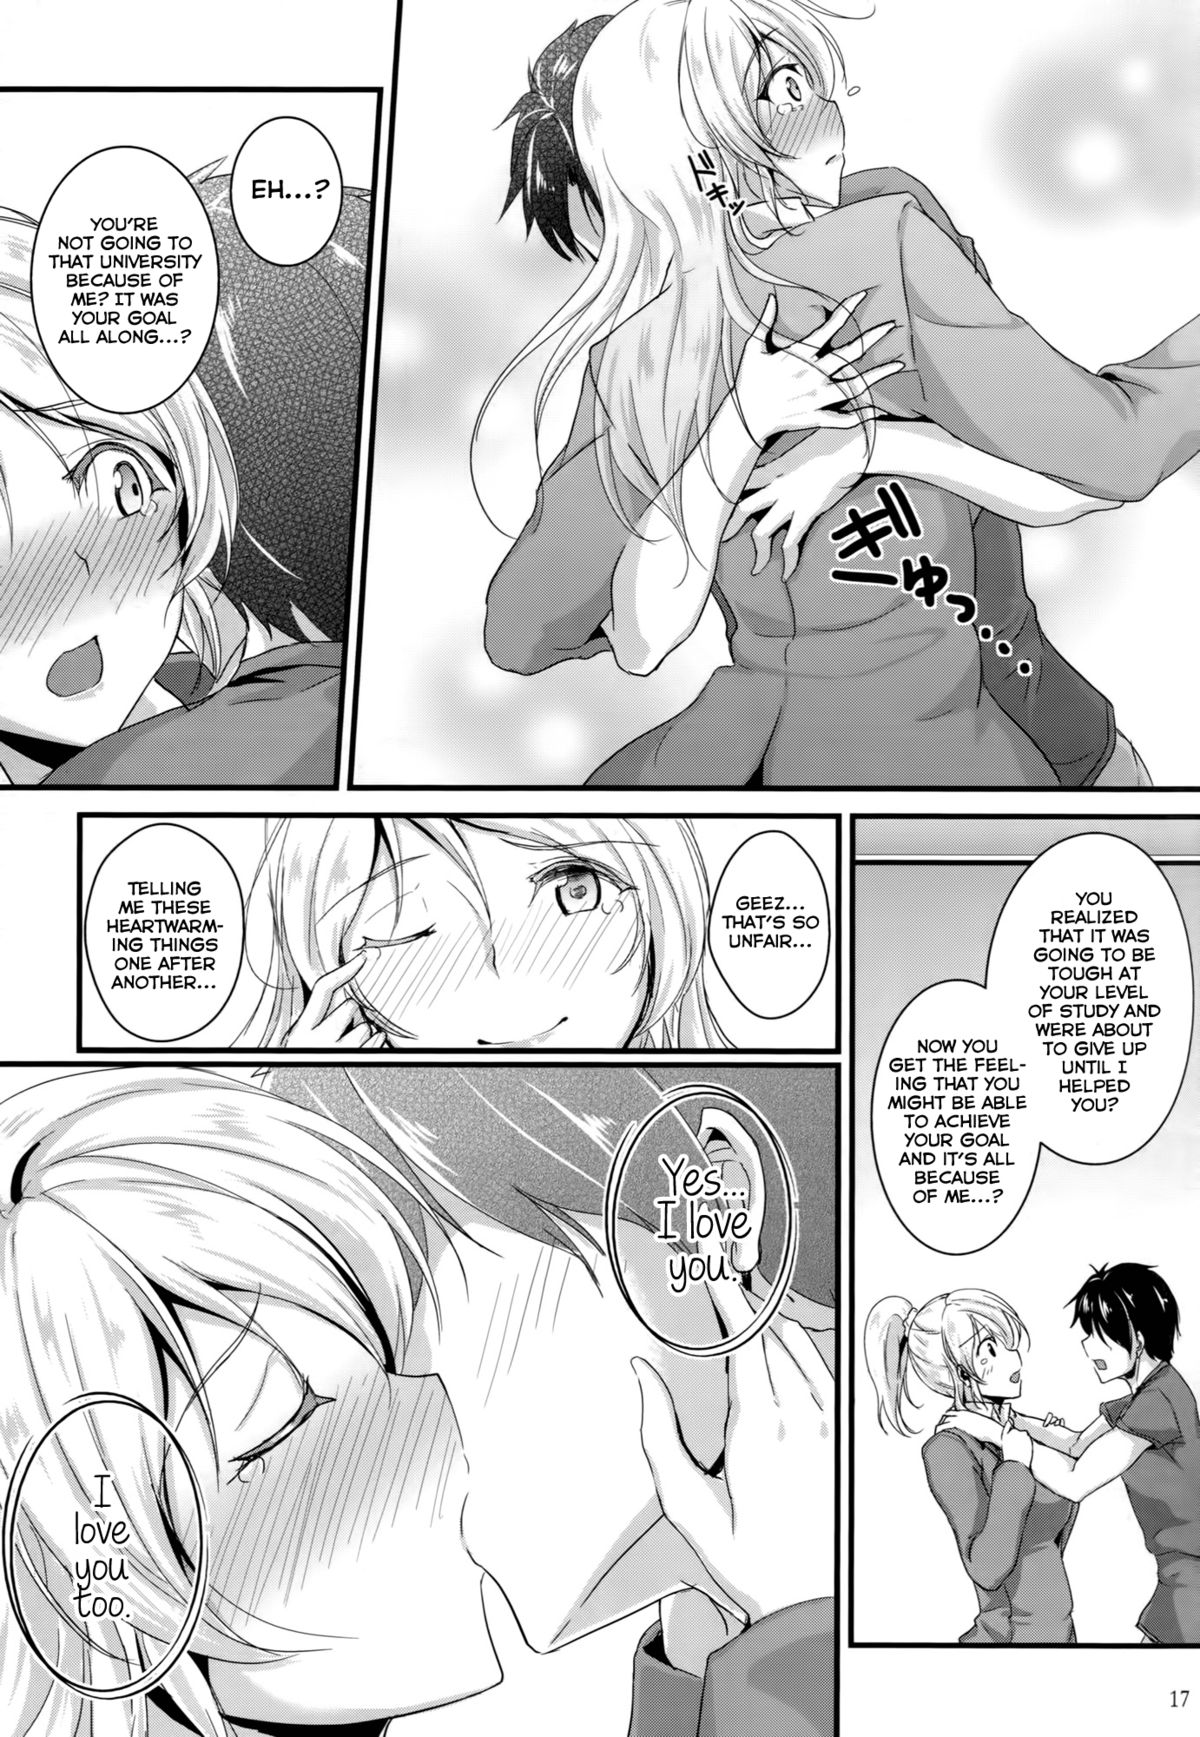 (C87) [Nuno no Ie (Moonlight)] Let's Study××× 5 (Love Live!) [English] [Facedesk] page 16 full